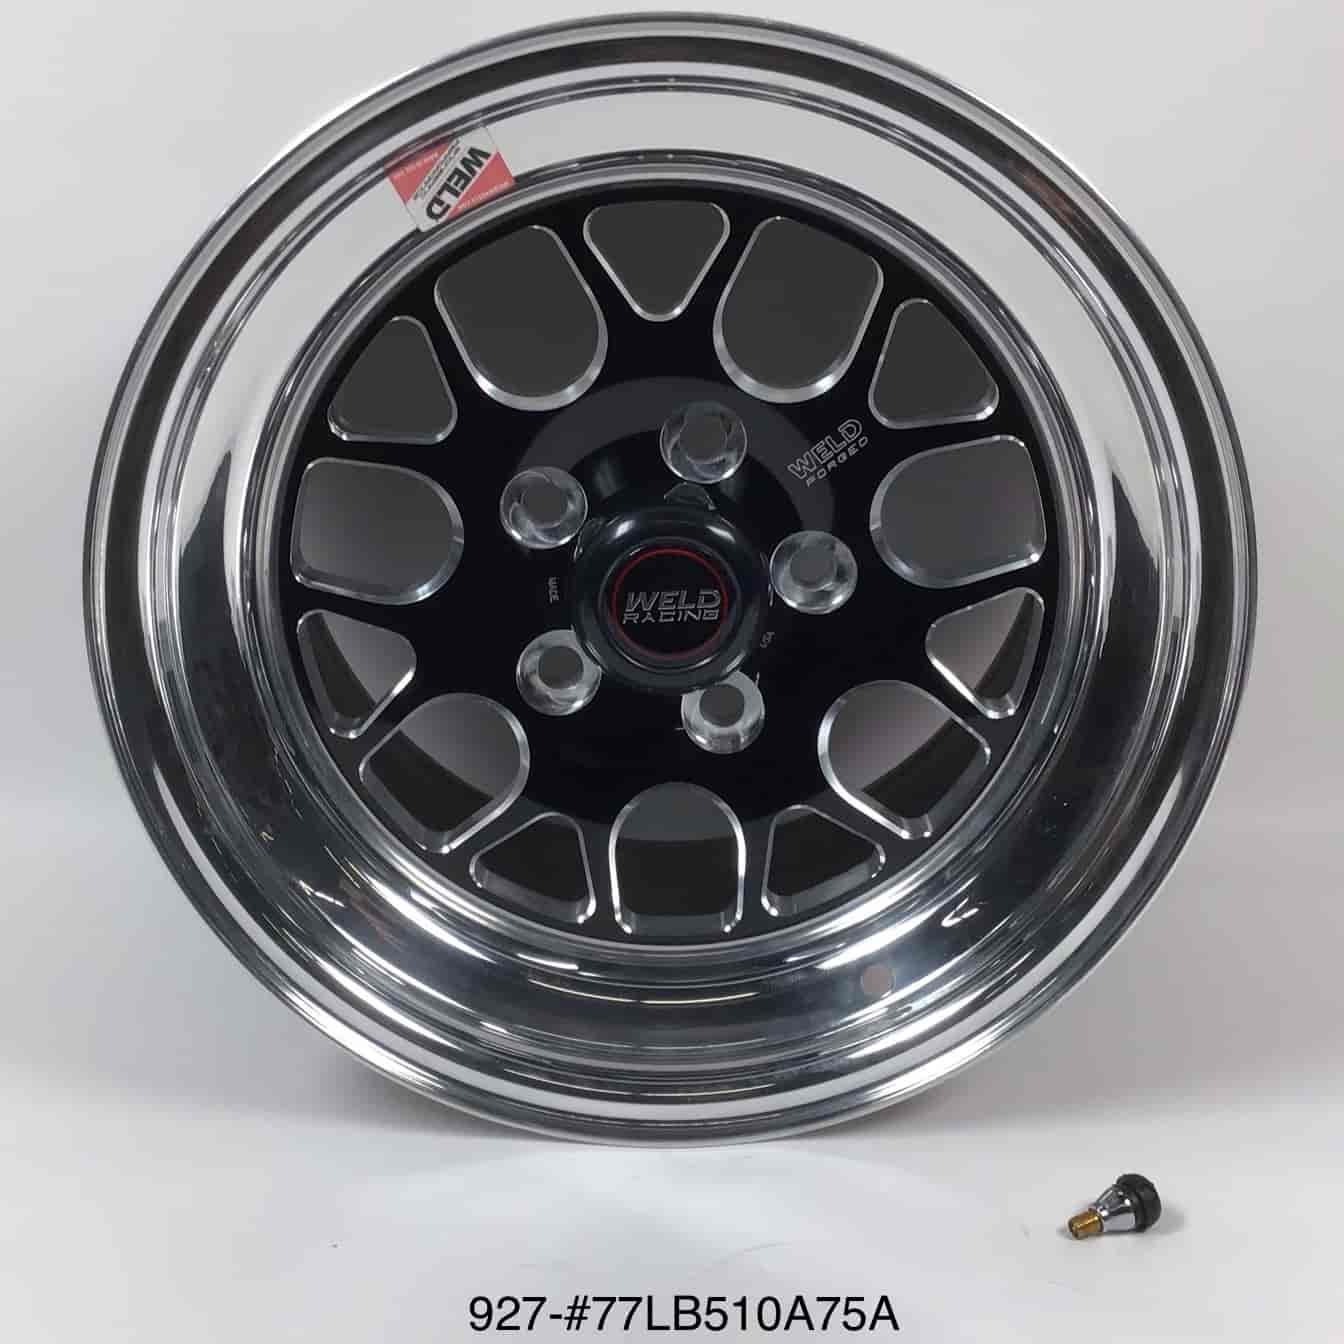 *BLEMISHED* RT-S Series S77 Black Wheel Size: 15